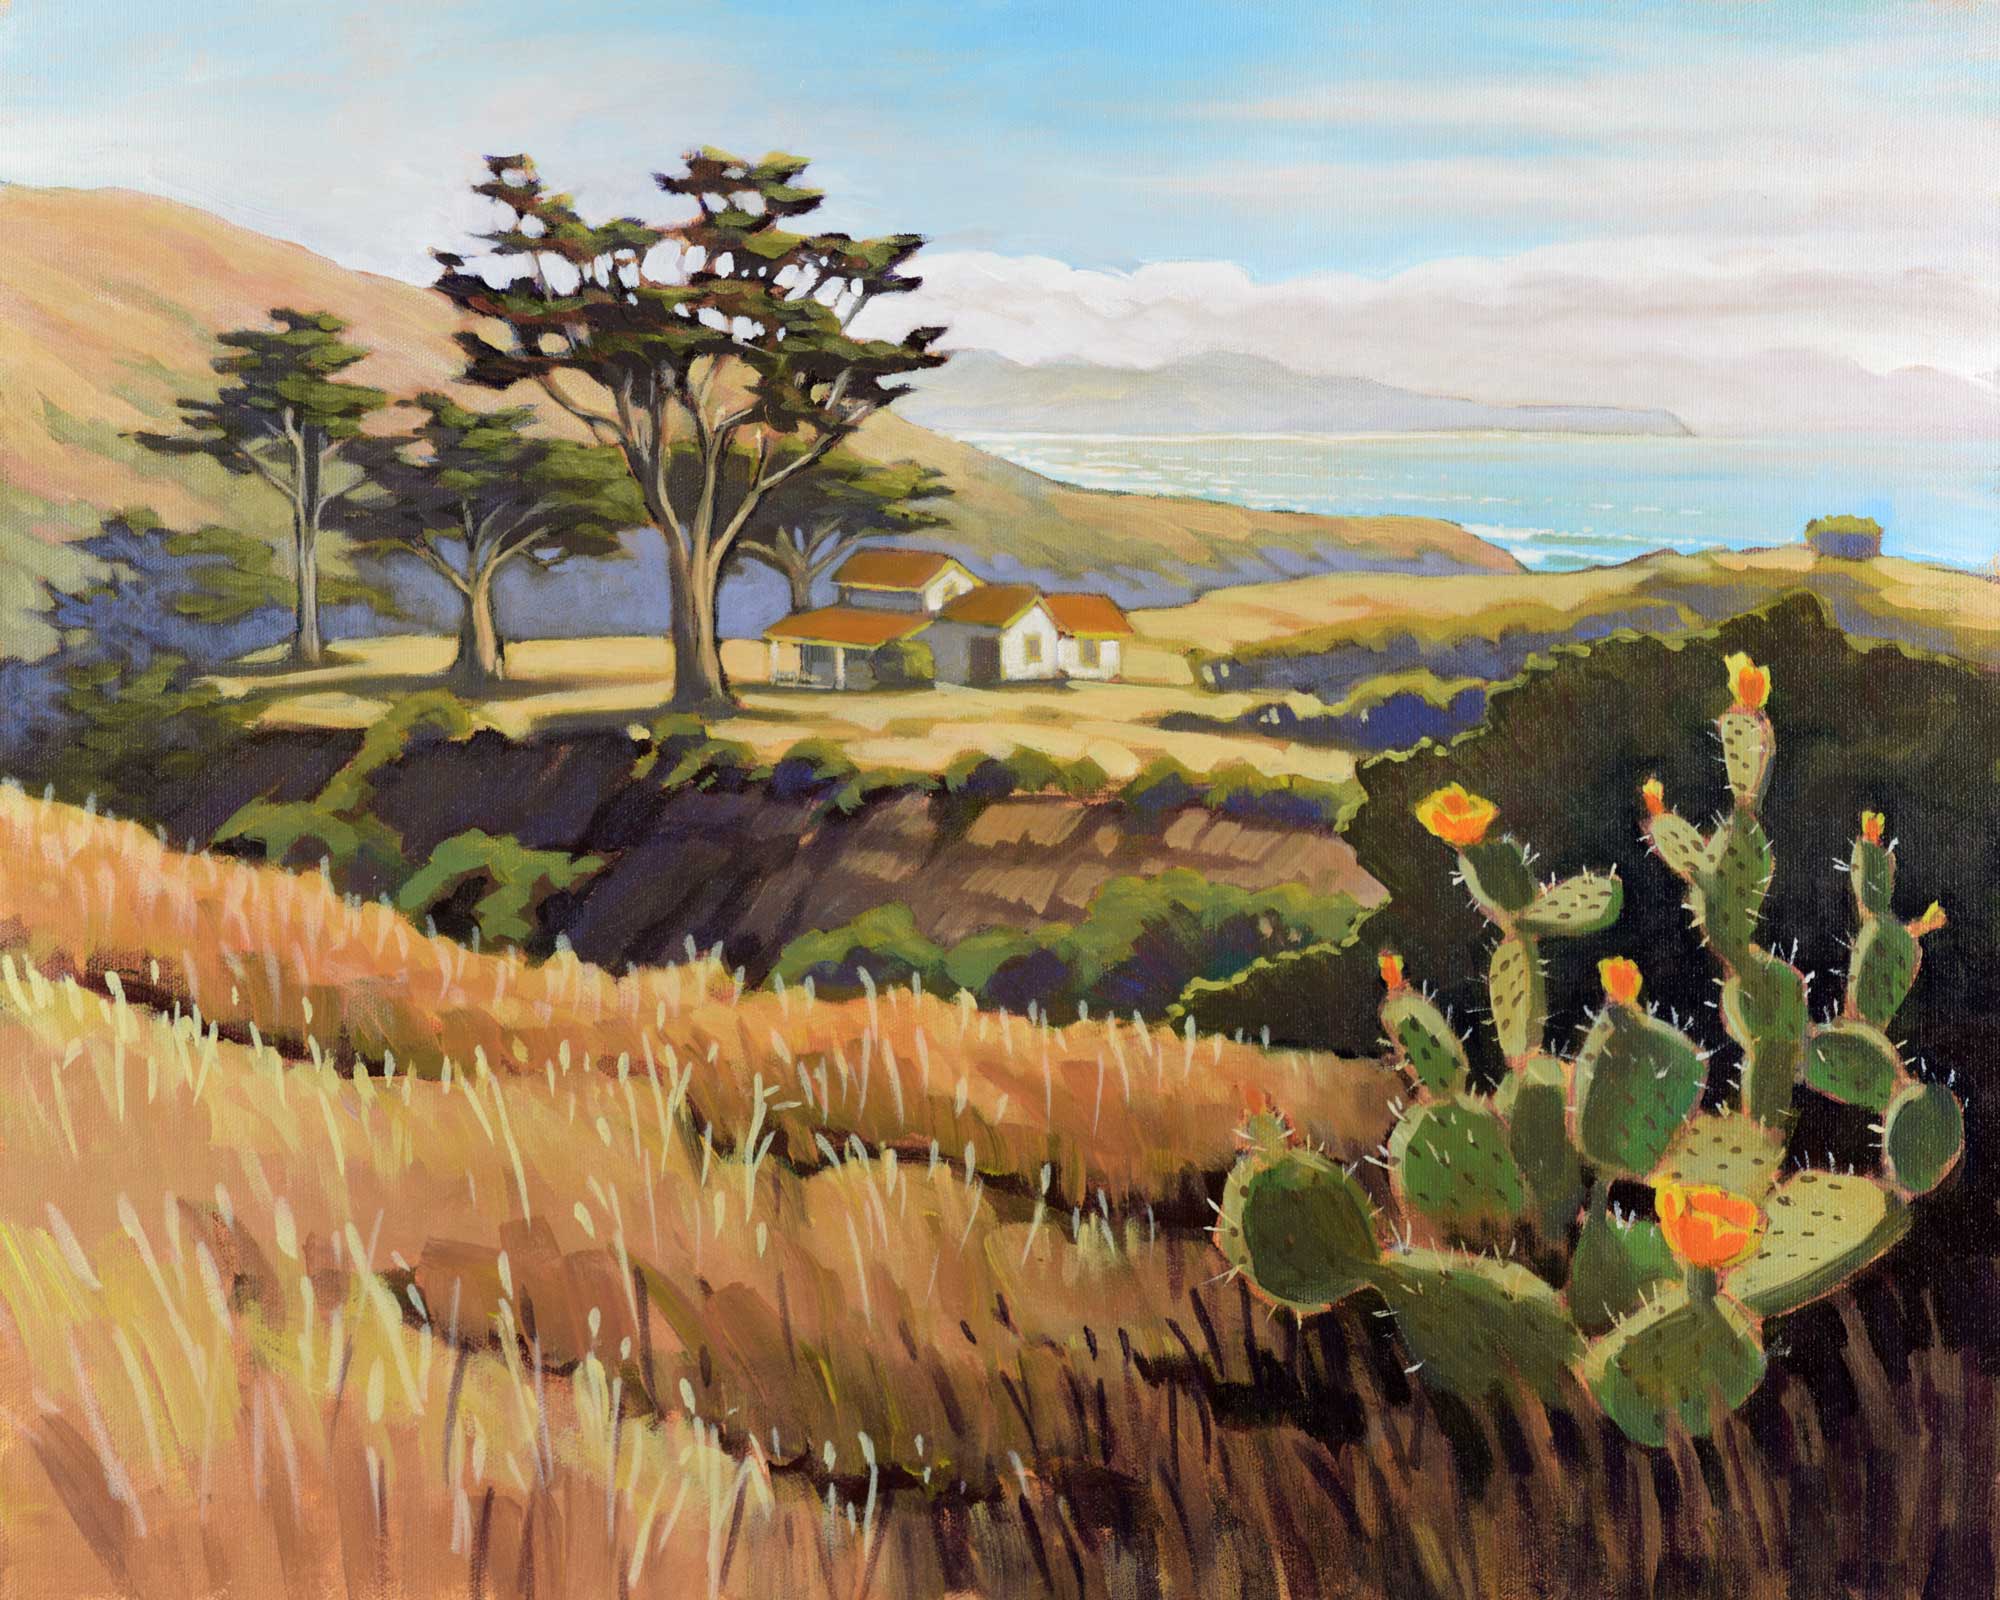 Plein air painting of a cactus and old buildings on the west side of Santa Cruz island off the coast of California